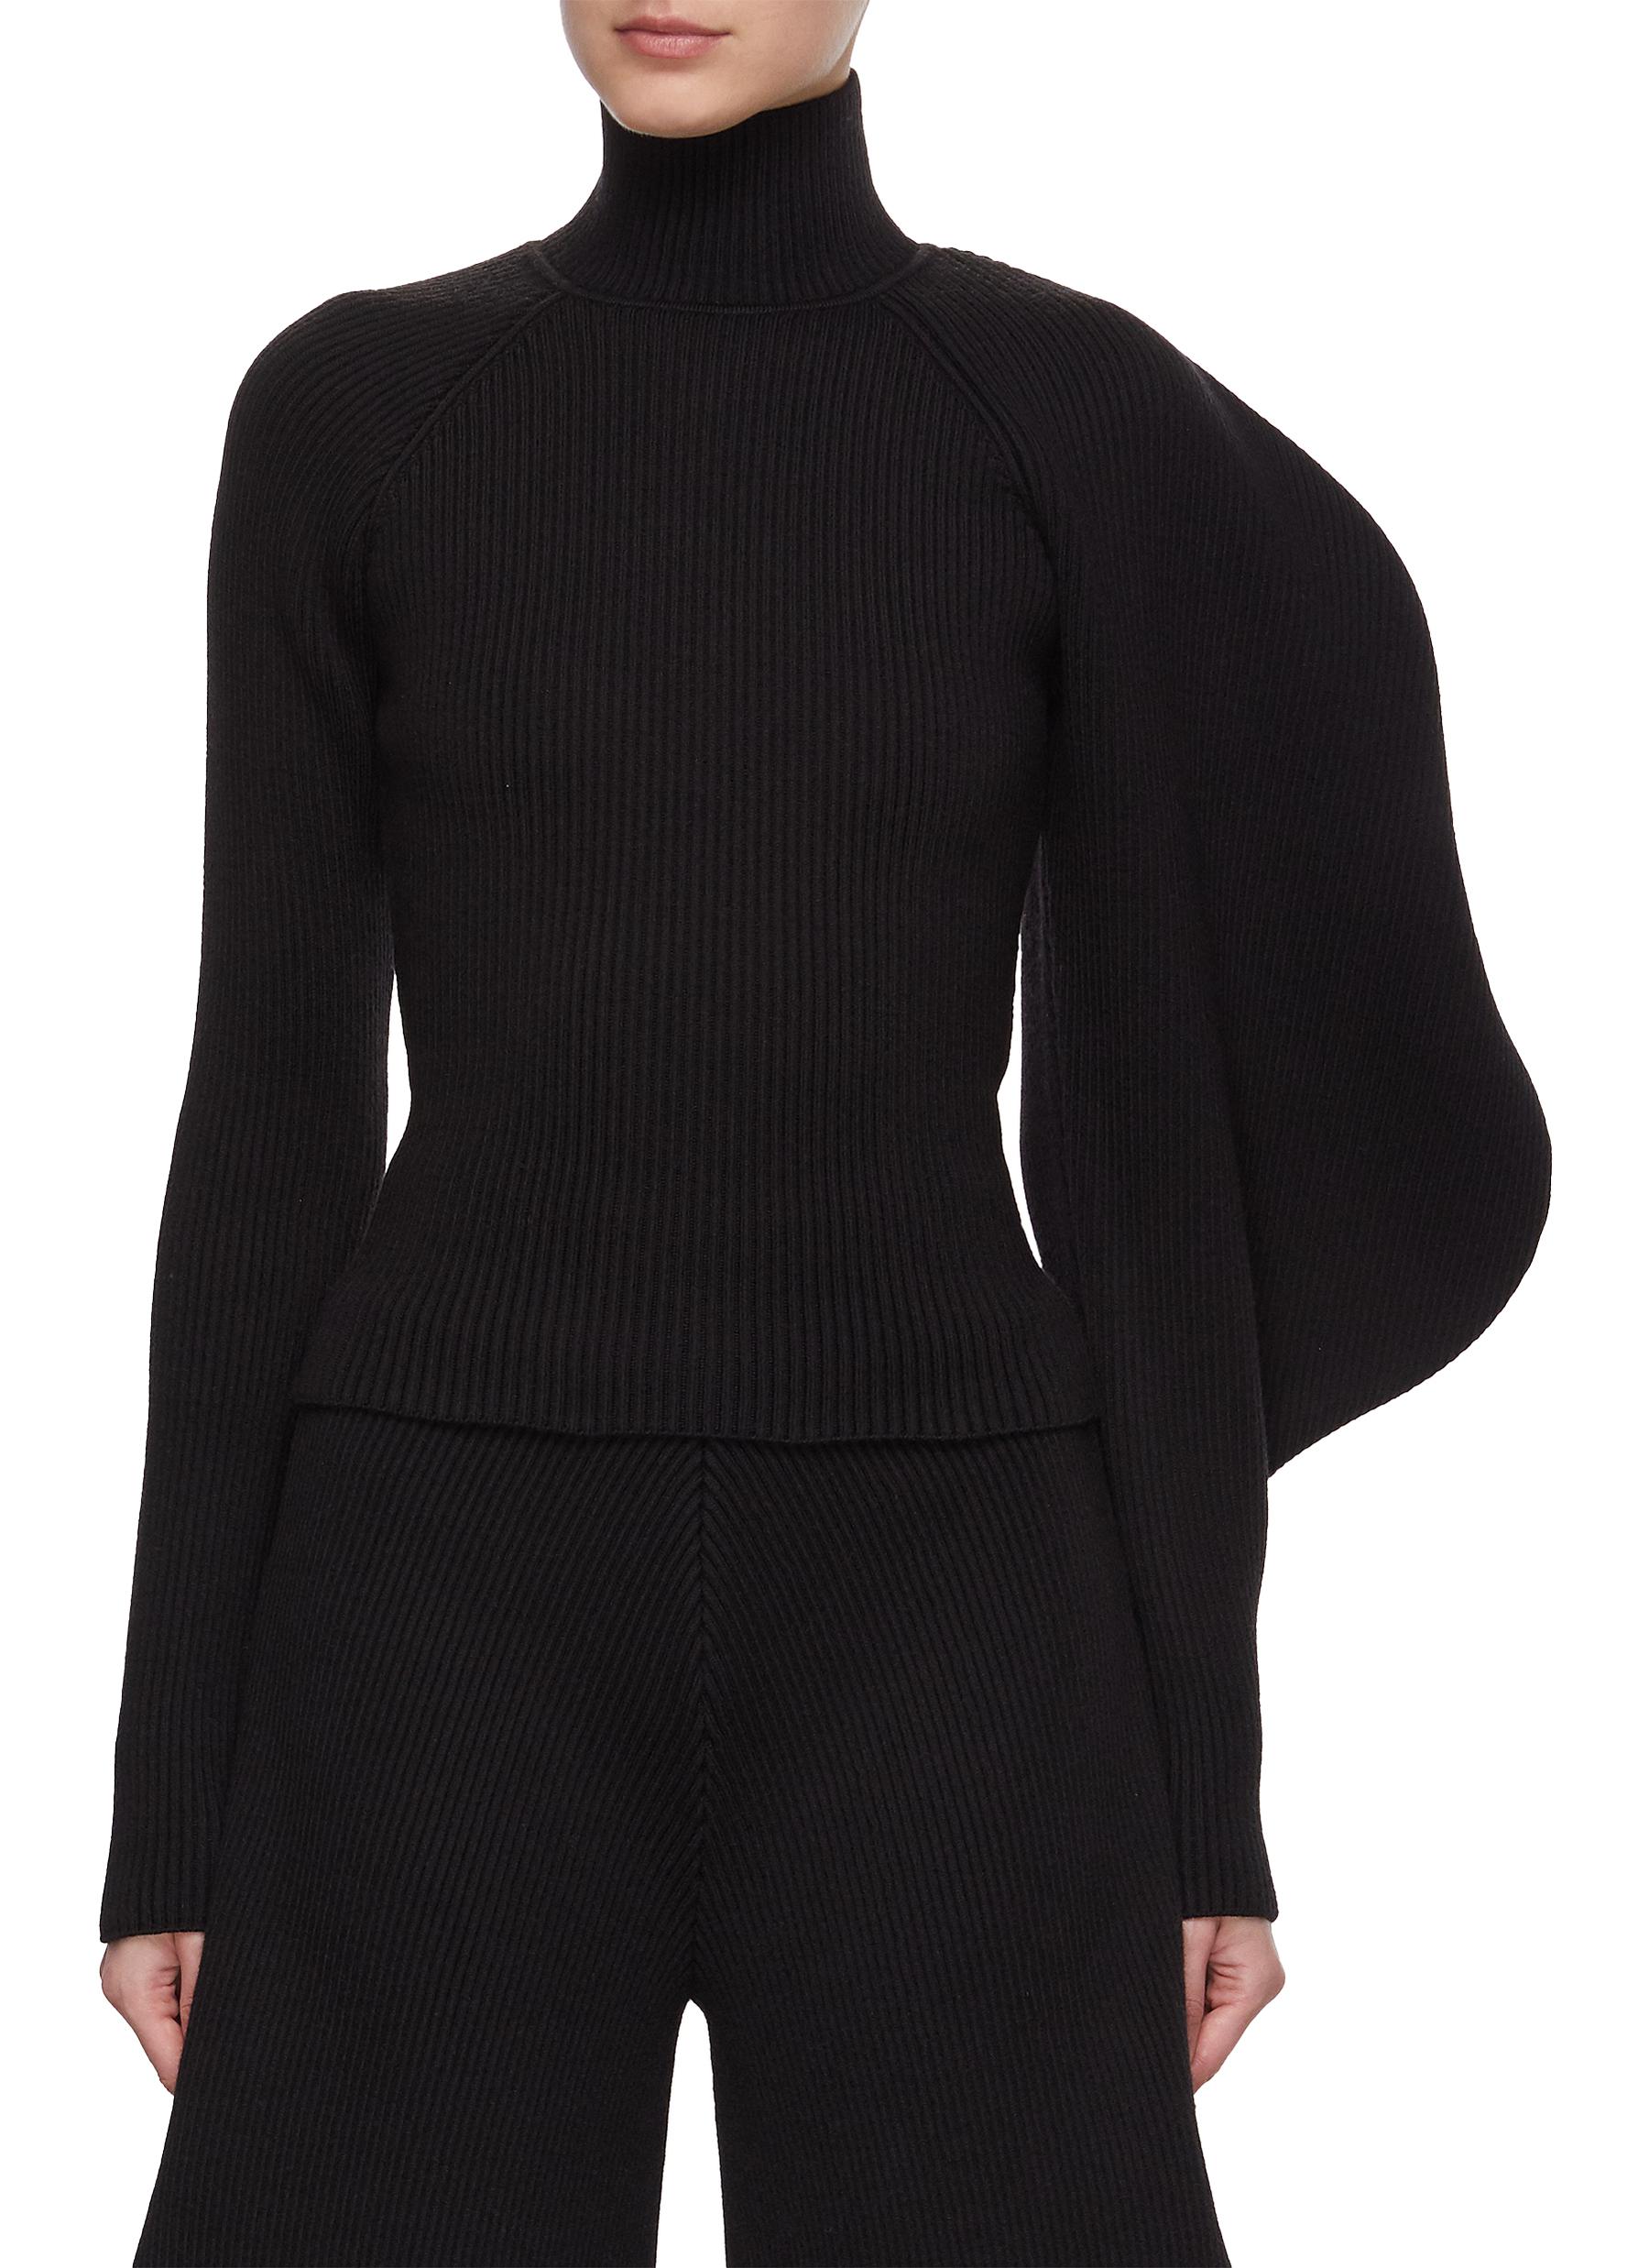 Asymmetric Curved Sleeve Knit Sweater